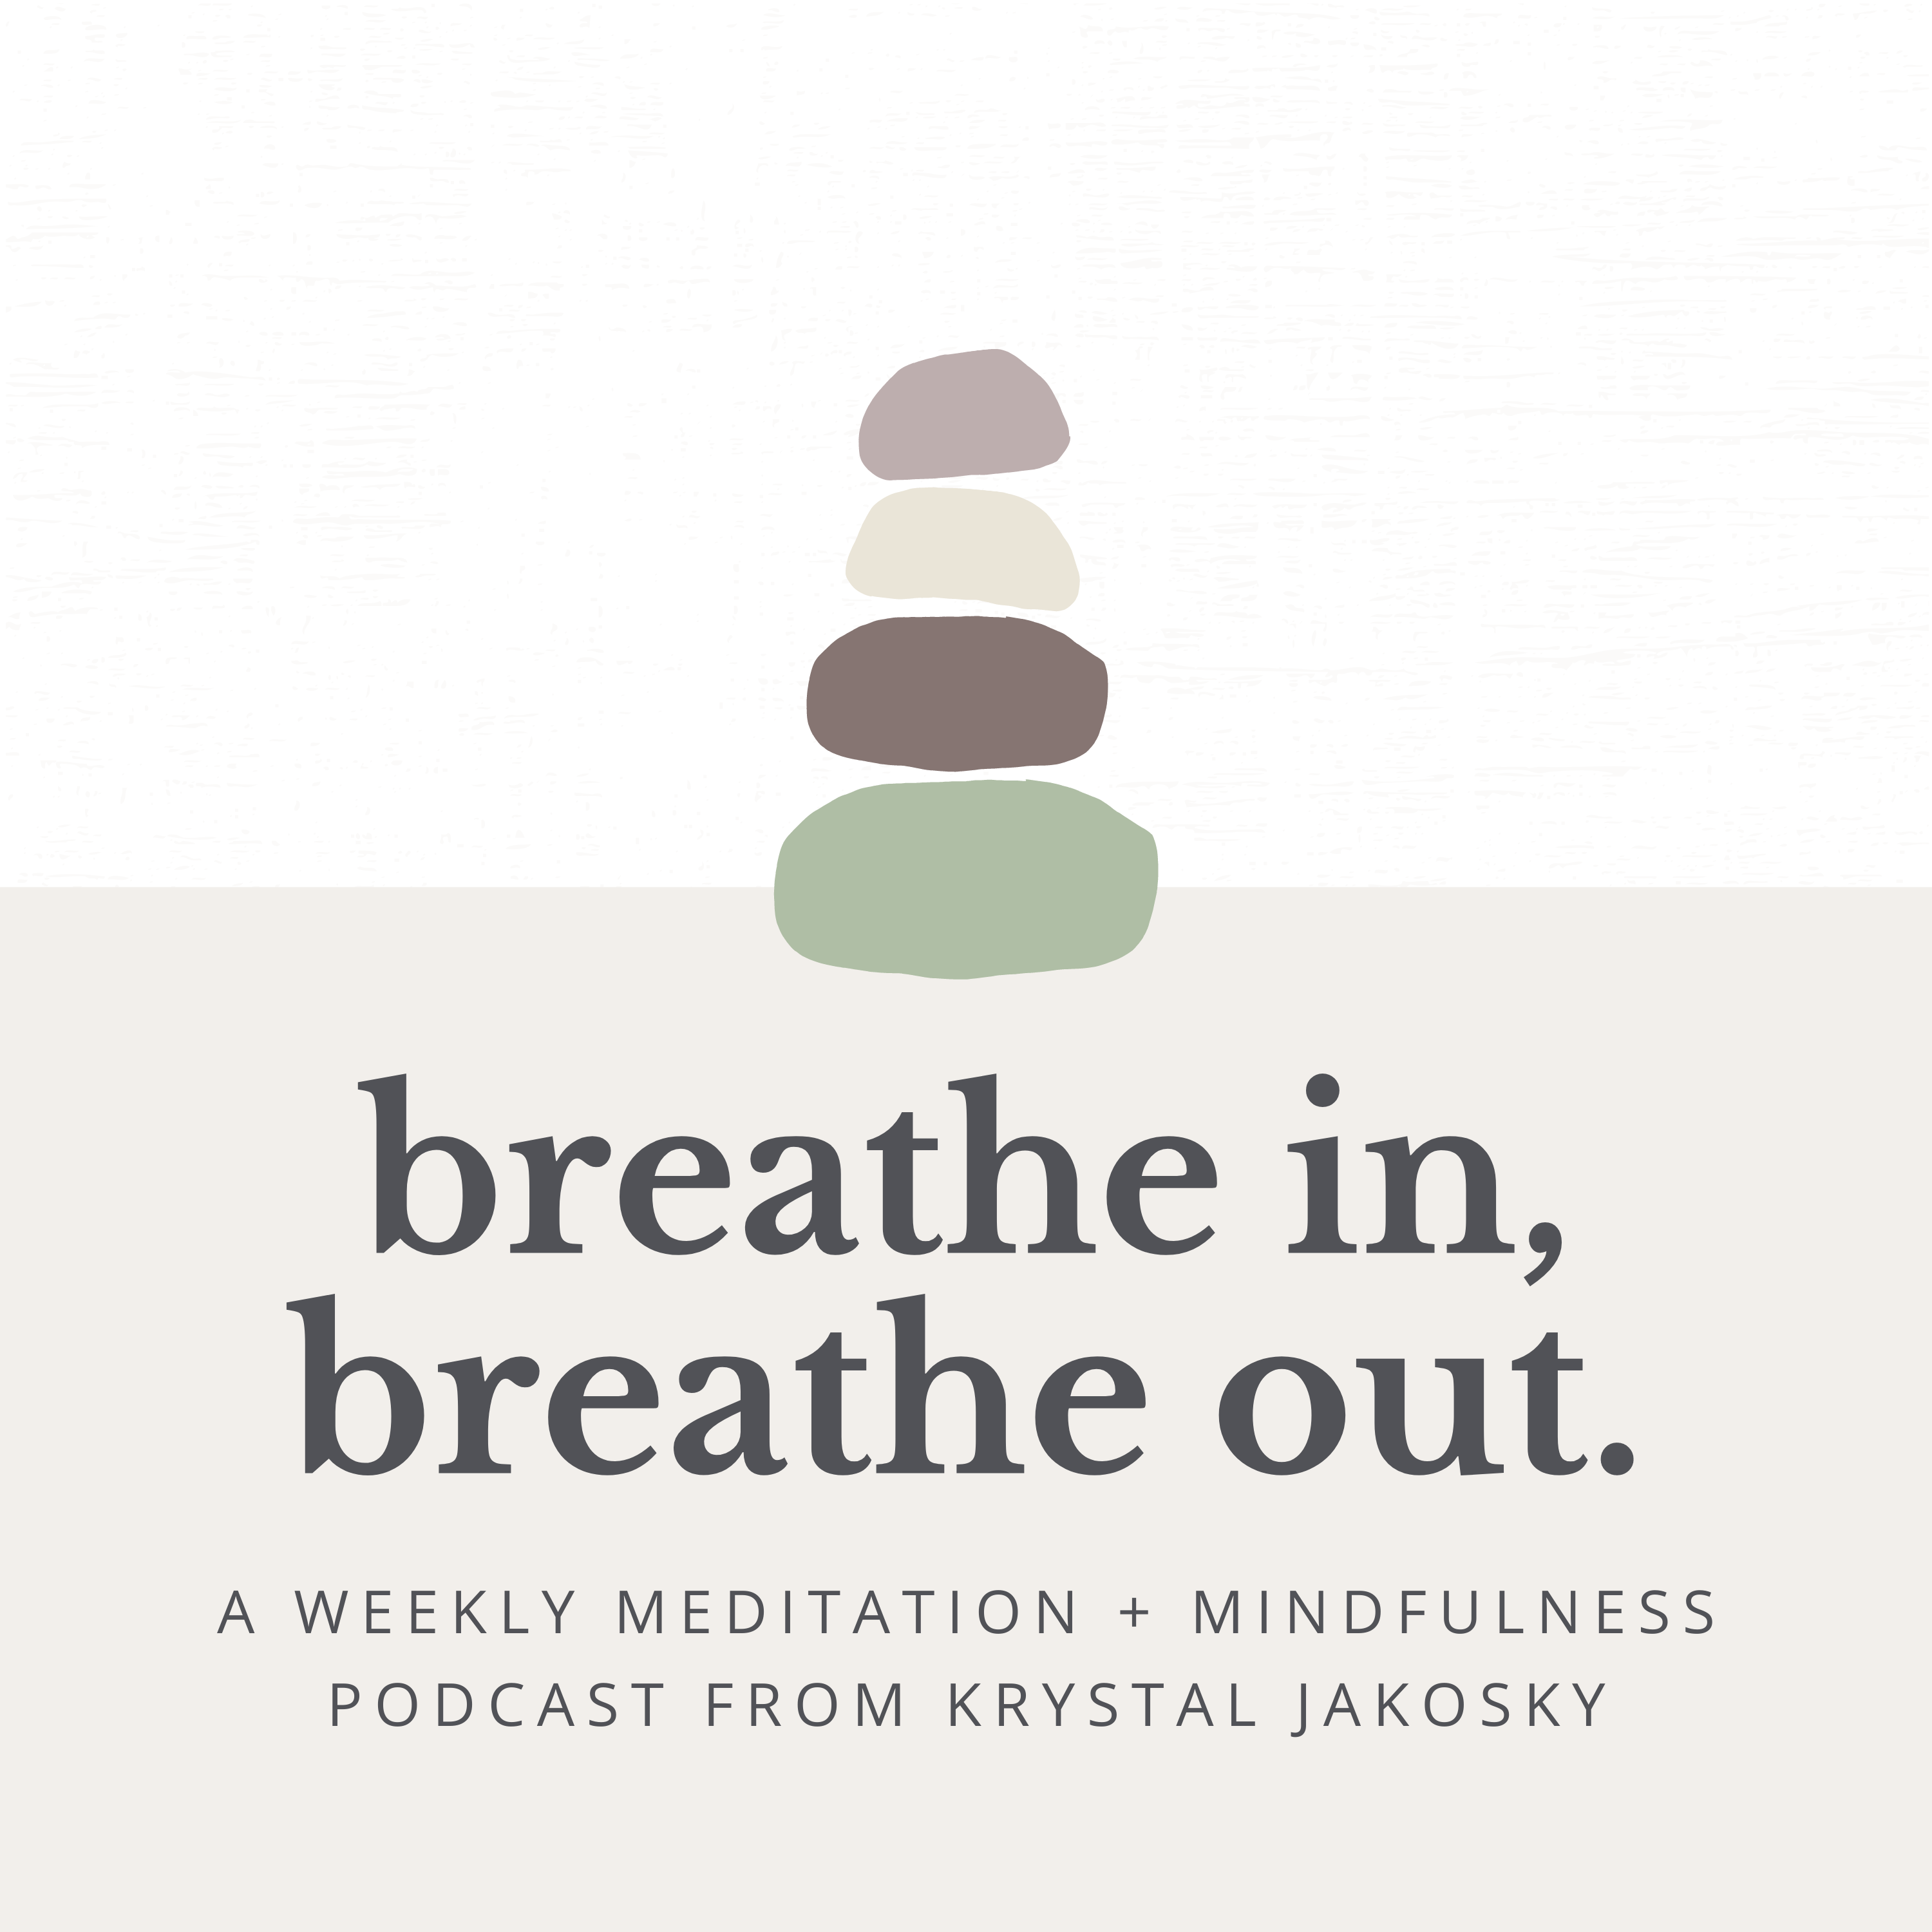 A Simple Meditation to Just Breathe